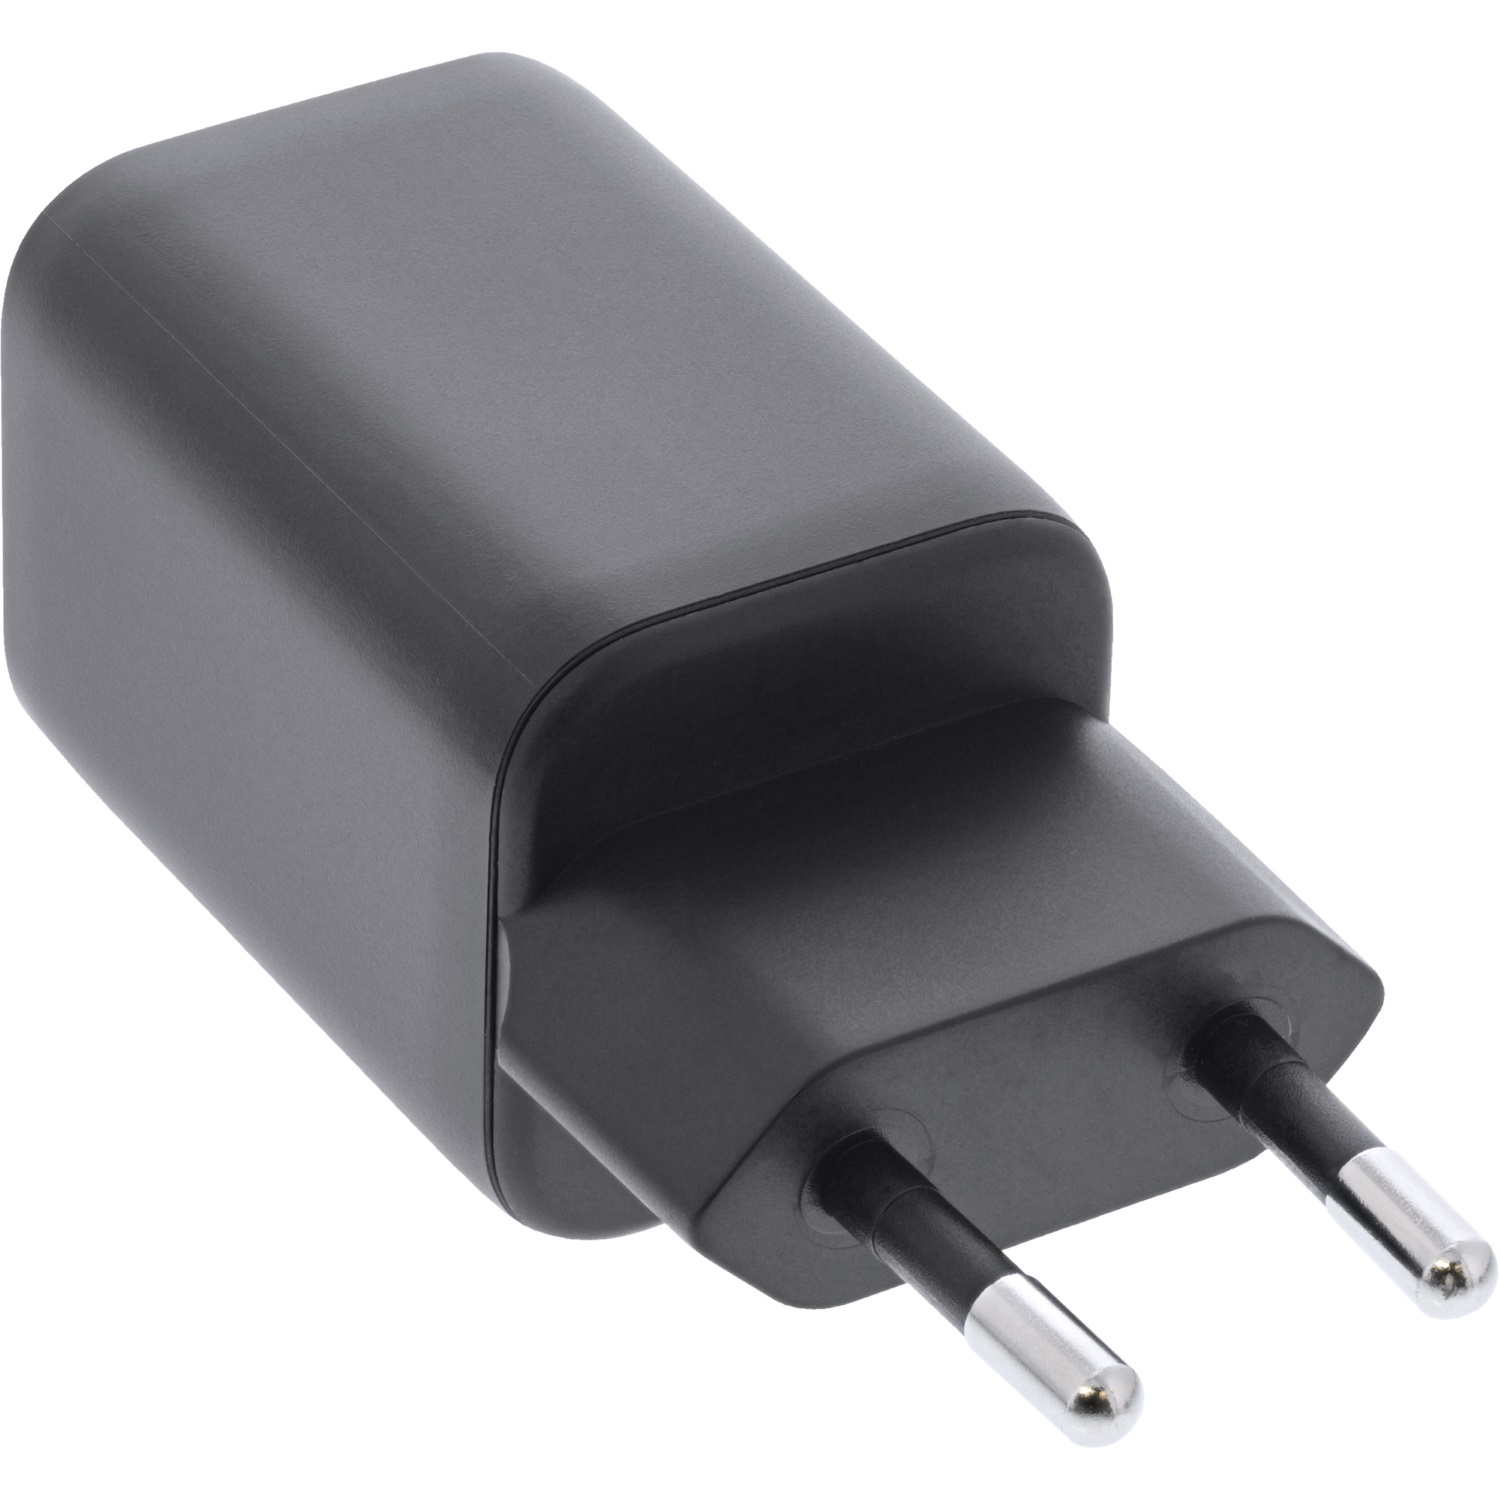 USB power supply/charger 33W, black